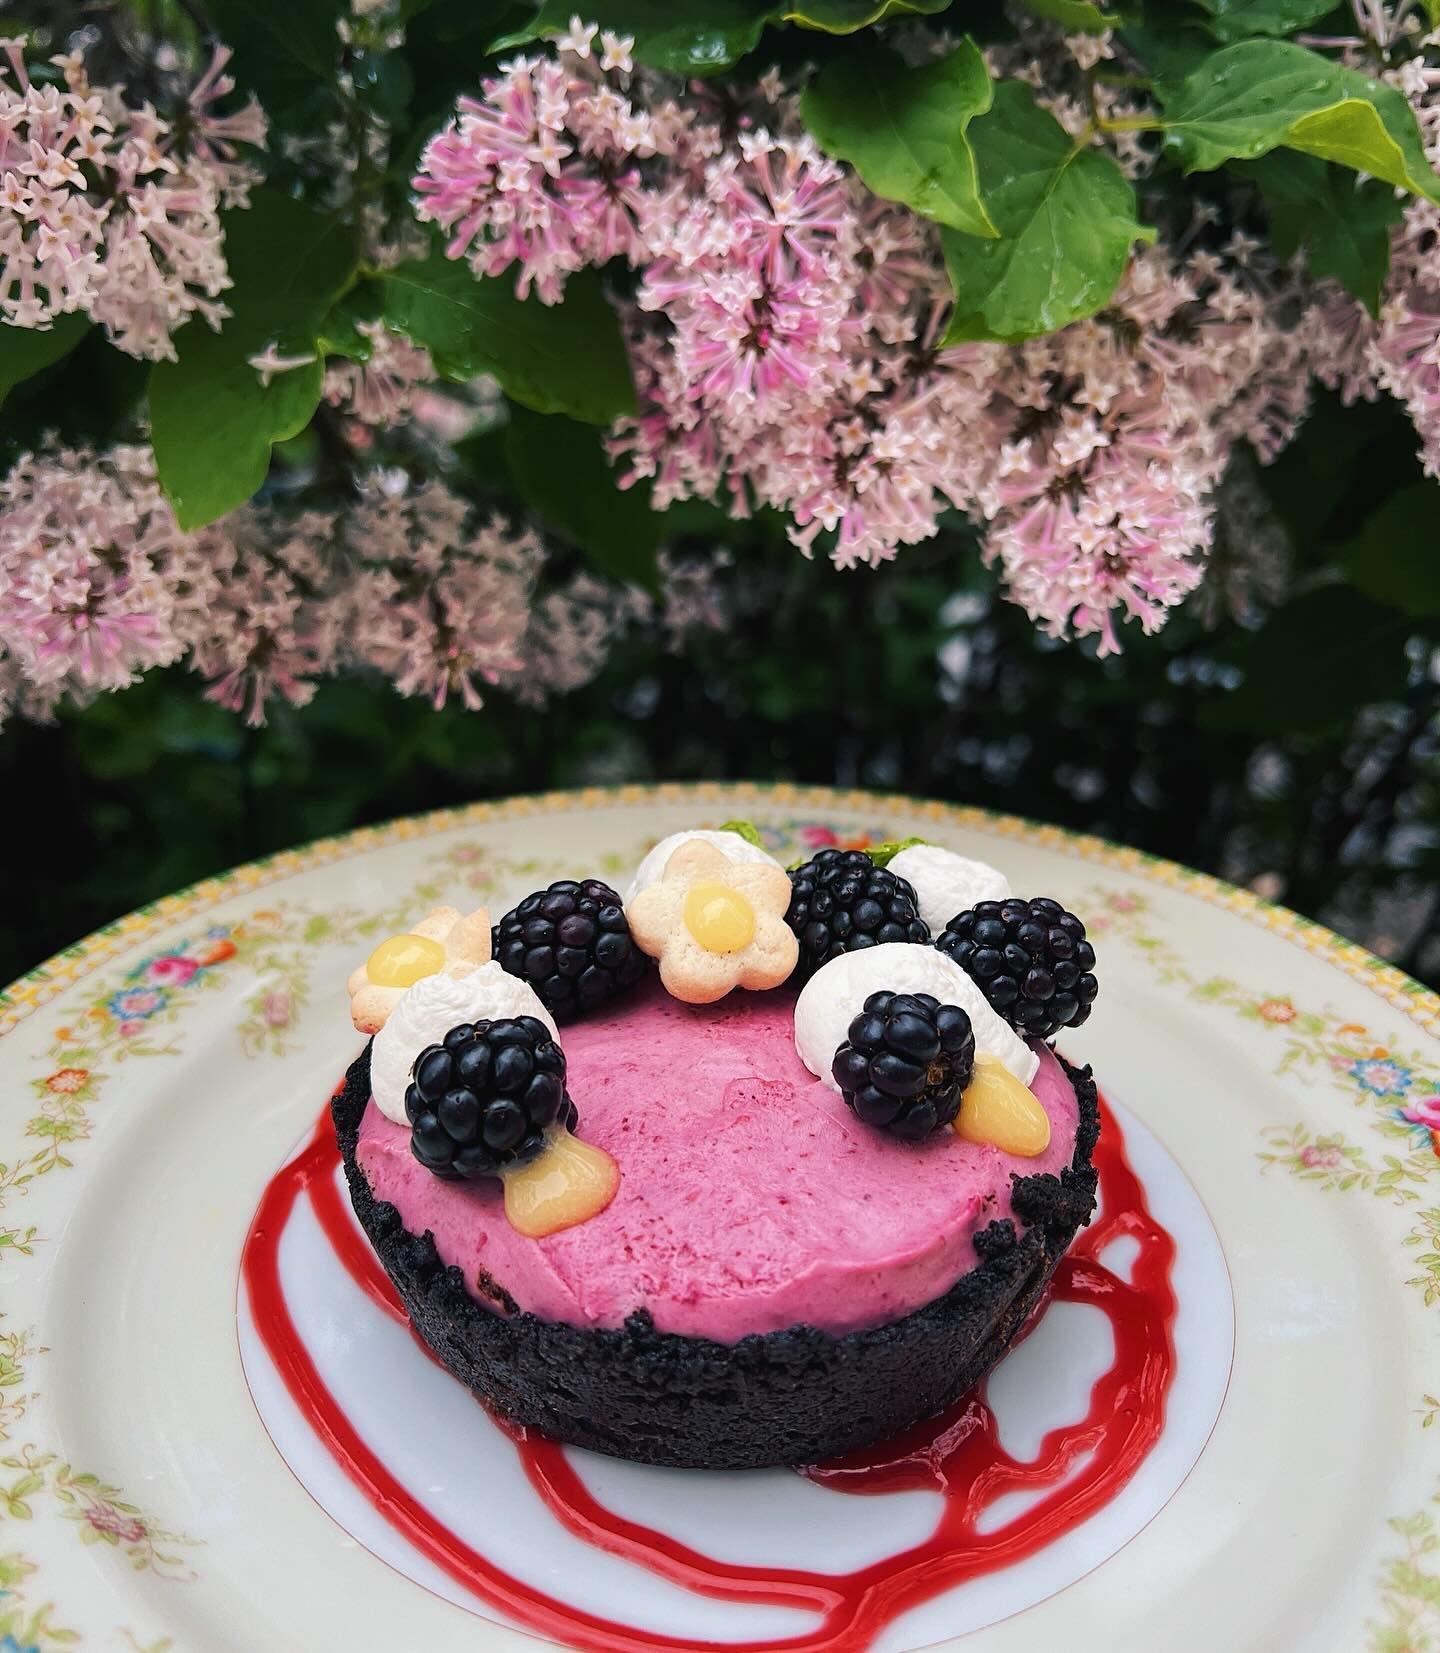 Our dessert this weekend is our chef&rsquo;s blackberry tarte 💜🩷

Made with a warm Oreo crust, creamy blackberry mousse, and topped with fresh whipped cream, lemon curd, and an adorable daisy cookie! 🌼 🤍

This will be served only at nighttime&rsq